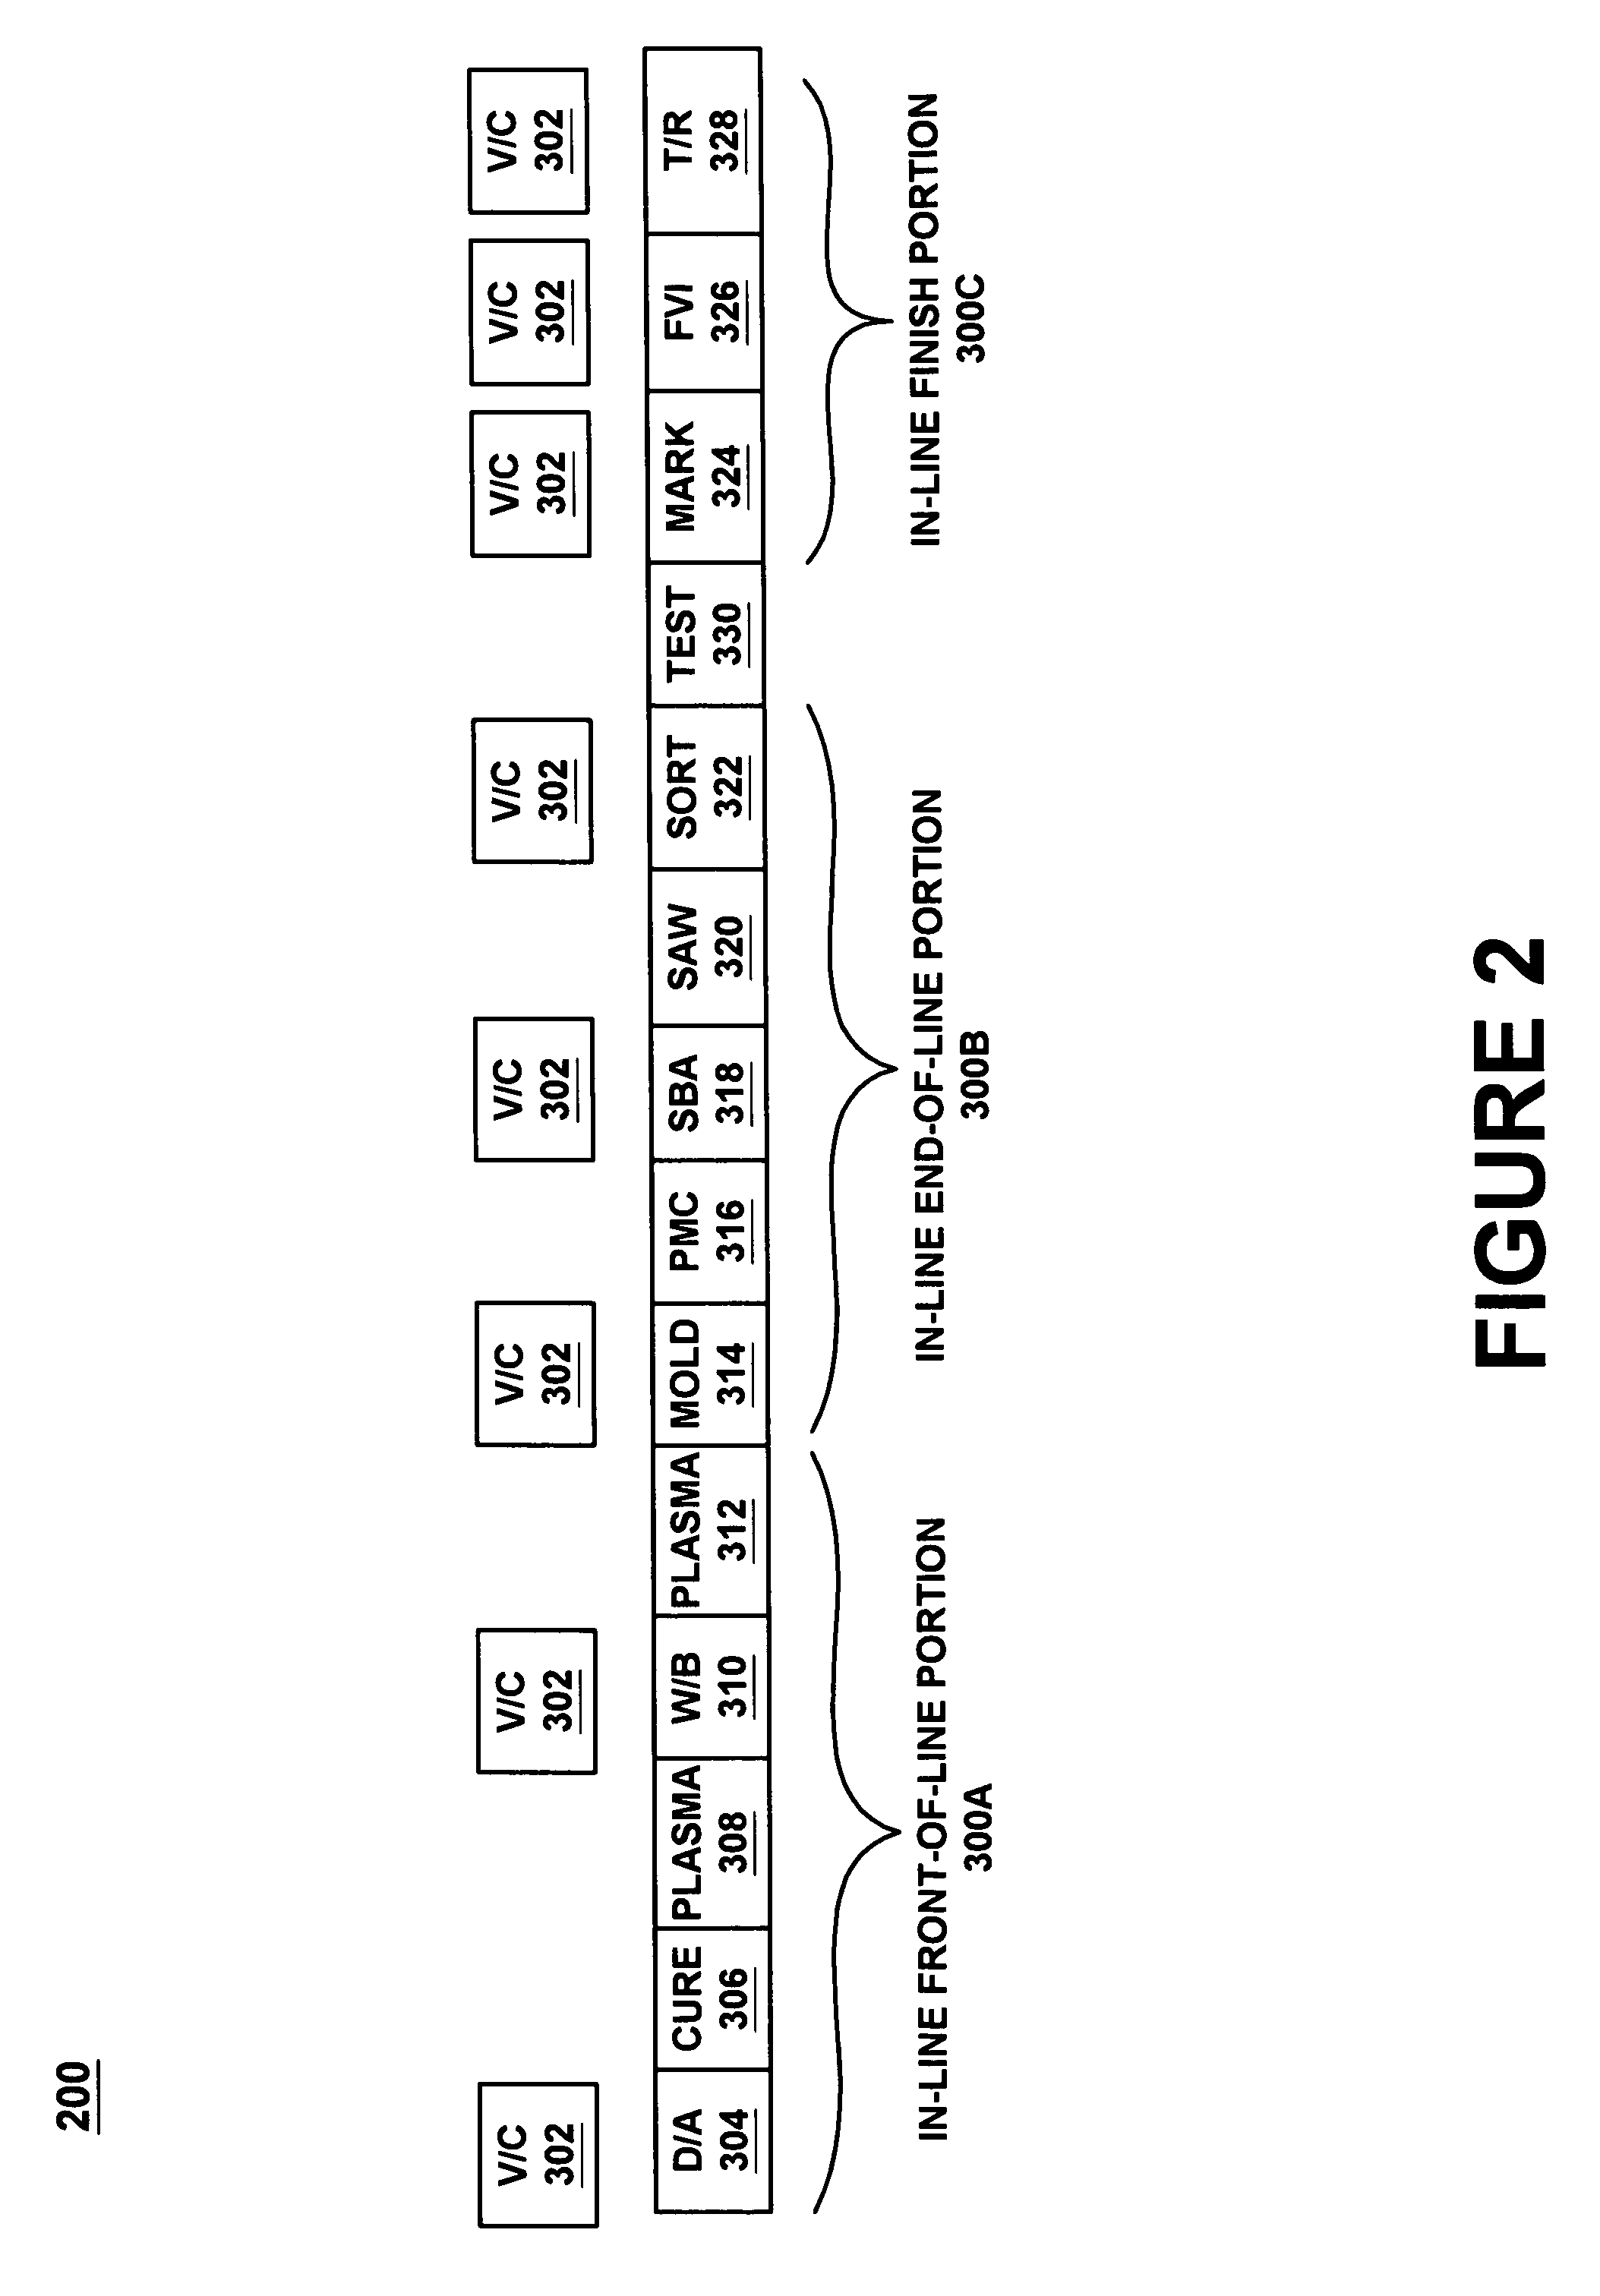 Method of performing back-end manufacturing of an integrated circuit device